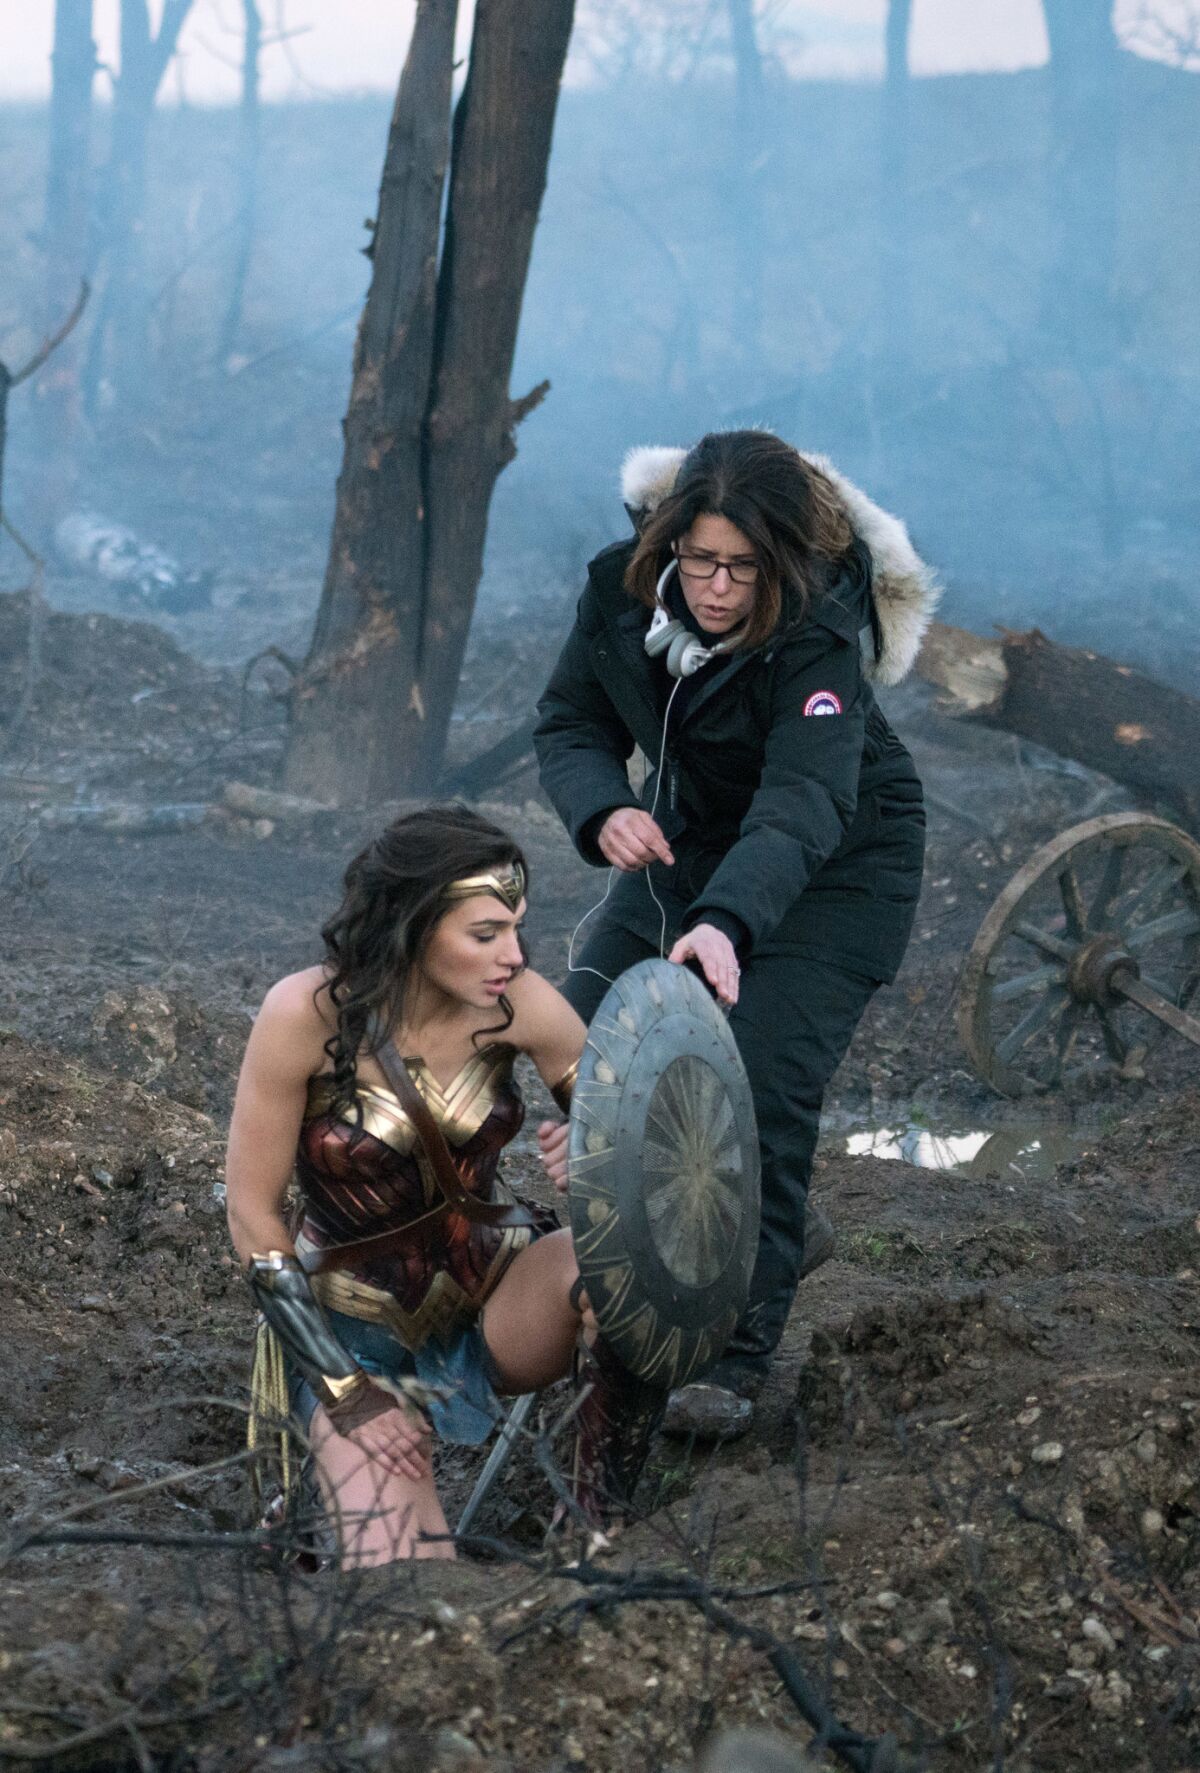 Gal Gadot and director Patty Jenkins on the set of "Wonder Woman." (Clay Enos / Warner Bros. Entertainment)